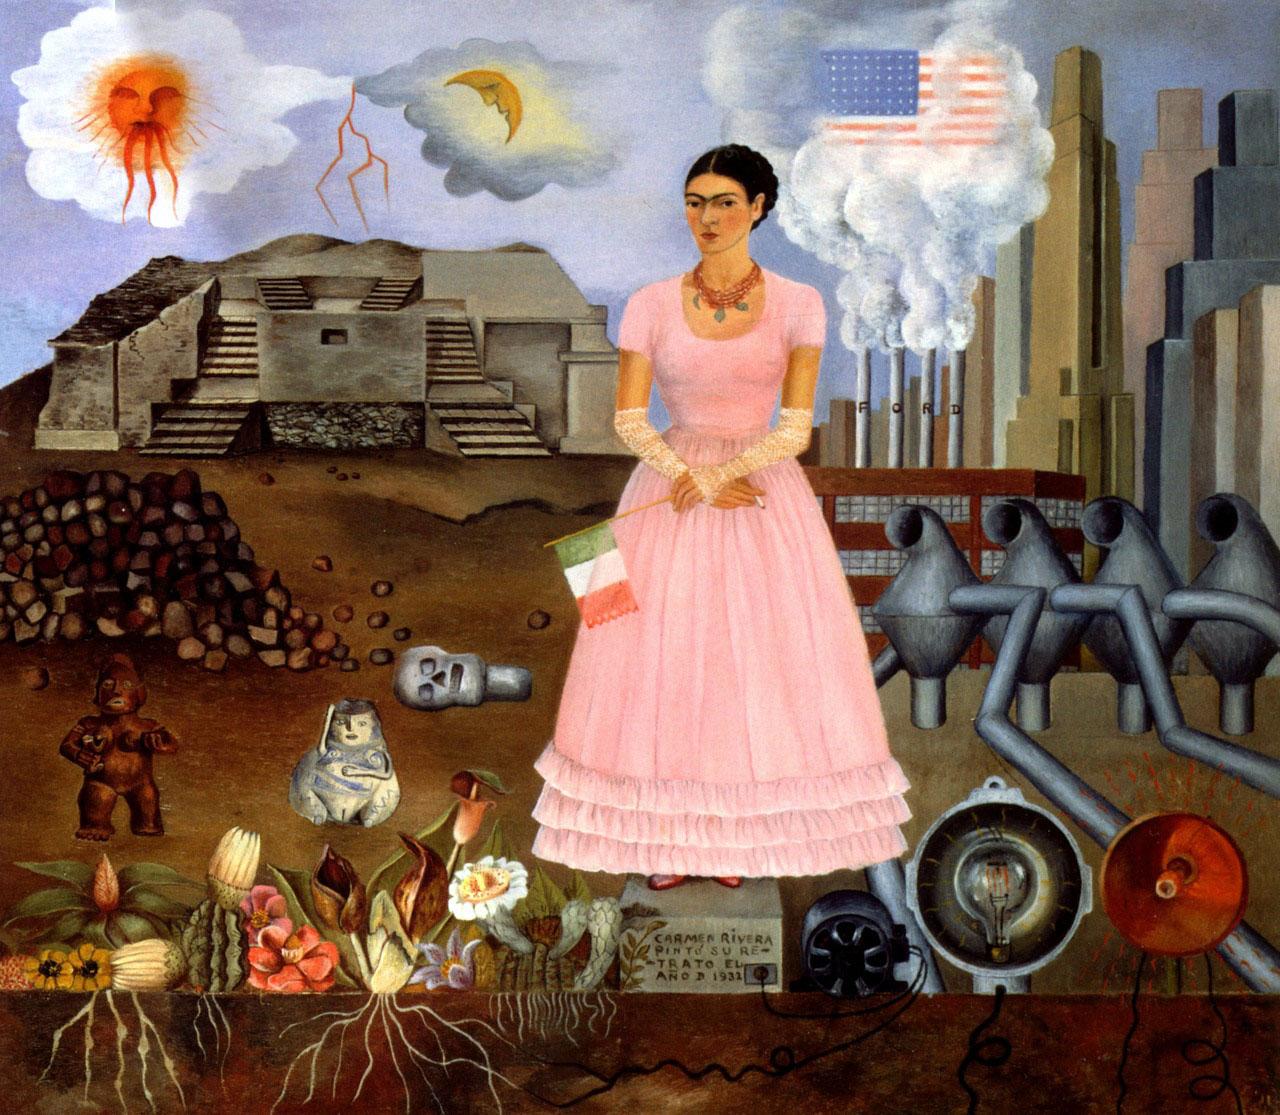 Self-Portrait on the Borderline between Mexico and the United States, Frida Kahlo, 1932